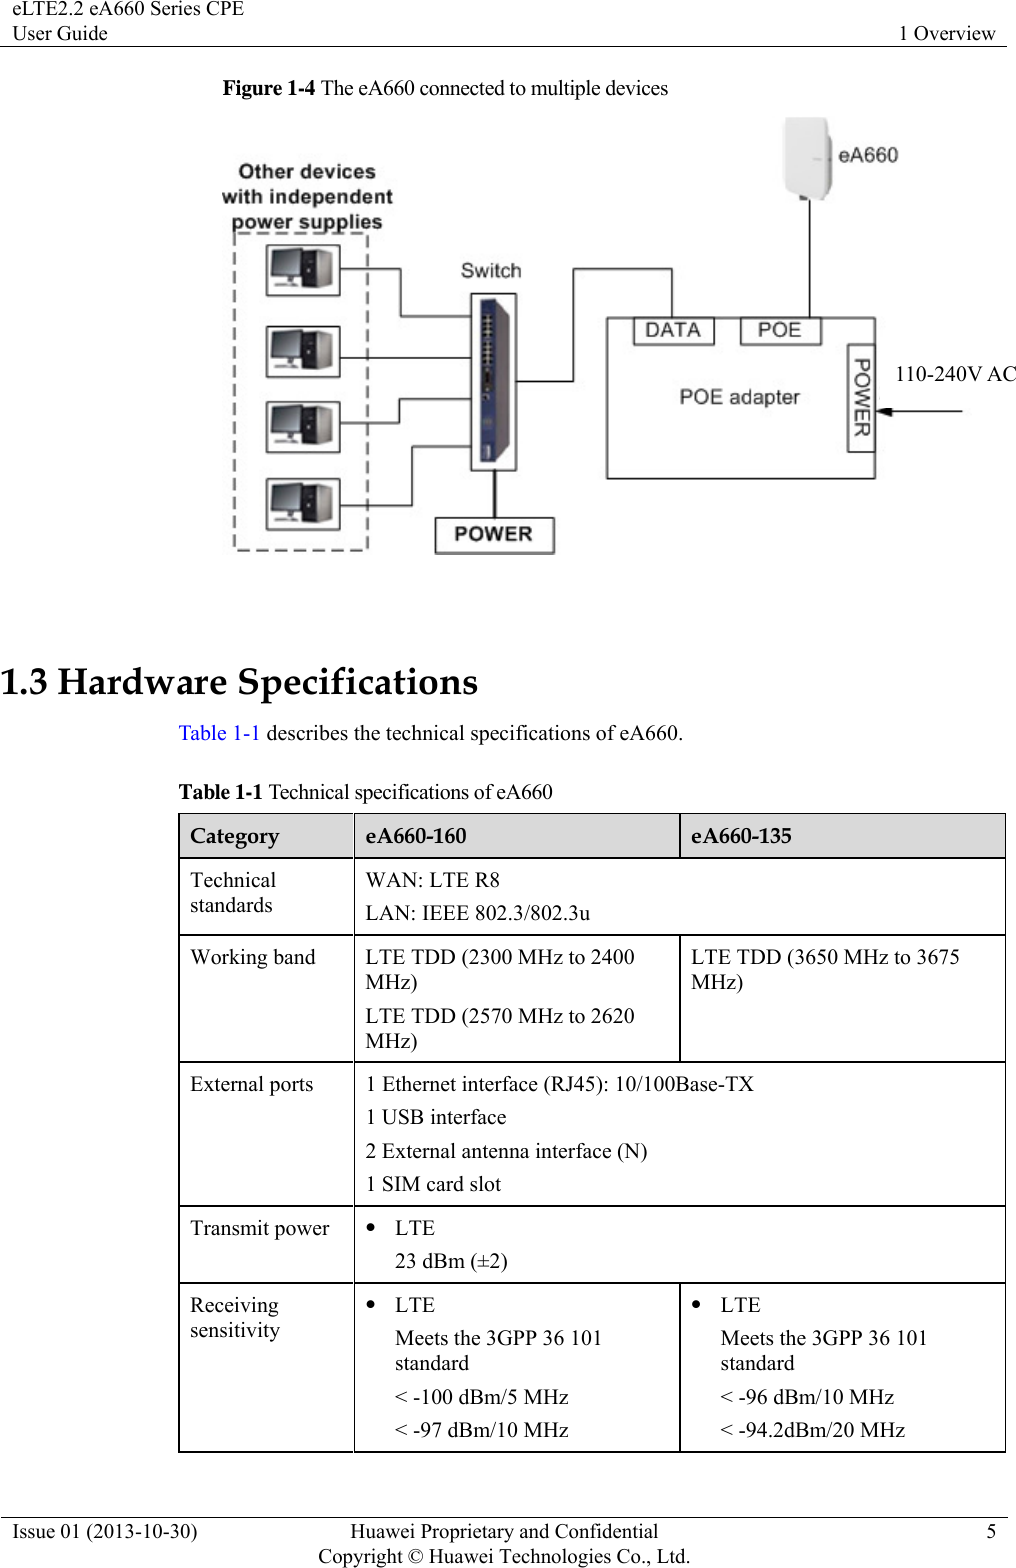 eLTE2.2 eA660 Series CPE User Guide  1 Overview Issue 01 (2013-10-30)  Huawei Proprietary and Confidential         Copyright © Huawei Technologies Co., Ltd.5 Figure 1-4 The eA660 connected to multiple devices   1.3 Hardware Specifications Table 1-1 describes the technical specifications of eA660. Table 1-1 Technical specifications of eA660 Category  eA660-160  eA660-135 Technical standards WAN: LTE R8 LAN: IEEE 802.3/802.3u Working band  LTE TDD (2300 MHz to 2400 MHz) LTE TDD (2570 MHz to 2620 MHz) LTE TDD (3650 MHz to 3675 MHz)  External ports  1 Ethernet interface (RJ45): 10/100Base-TX 1 USB interface 2 External antenna interface (N) 1 SIM card slot Transmit power  z LTE 23 dBm (±2) Receiving sensitivity z LTE Meets the 3GPP 36 101 standard &lt; -100 dBm/5 MHz &lt; -97 dBm/10 MHz z LTE Meets the 3GPP 36 101 standard &lt; -96 dBm/10 MHz &lt; -94.2dBm/20 MHz 110-240V AC 